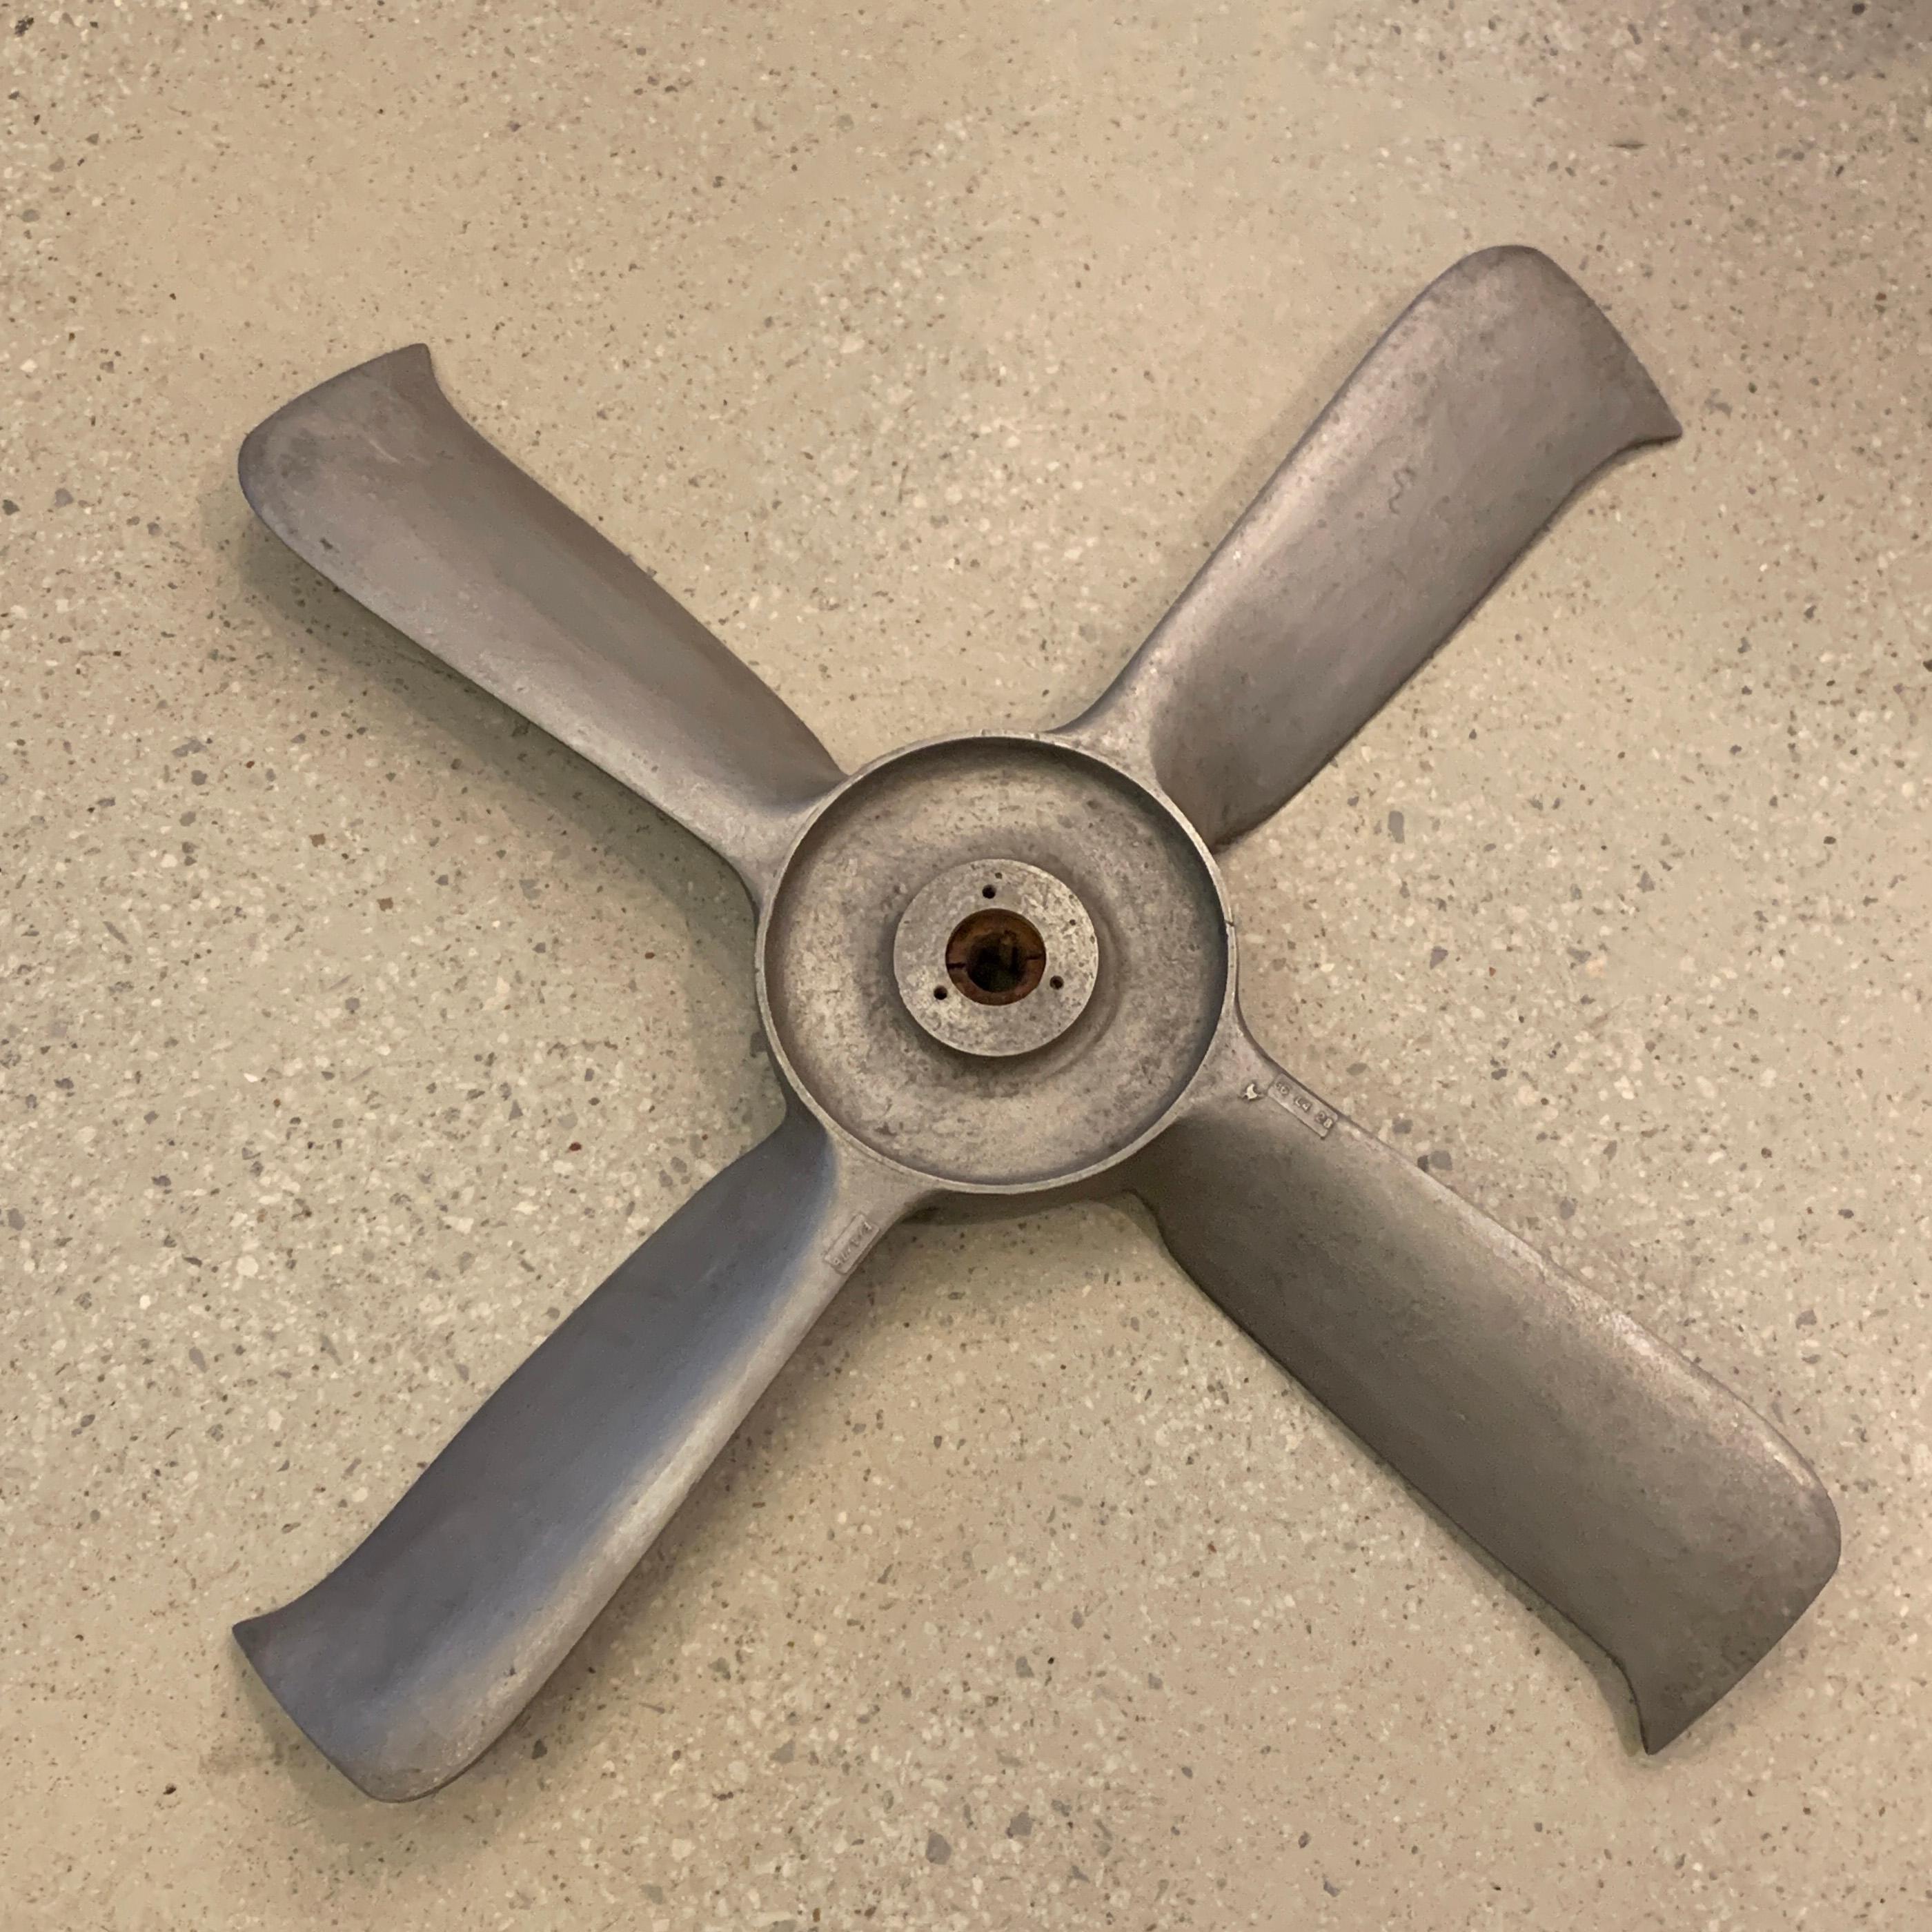 Large, aluminum, vent propeller is a wonderful, repurposed, industrial sculpture or architectural element.